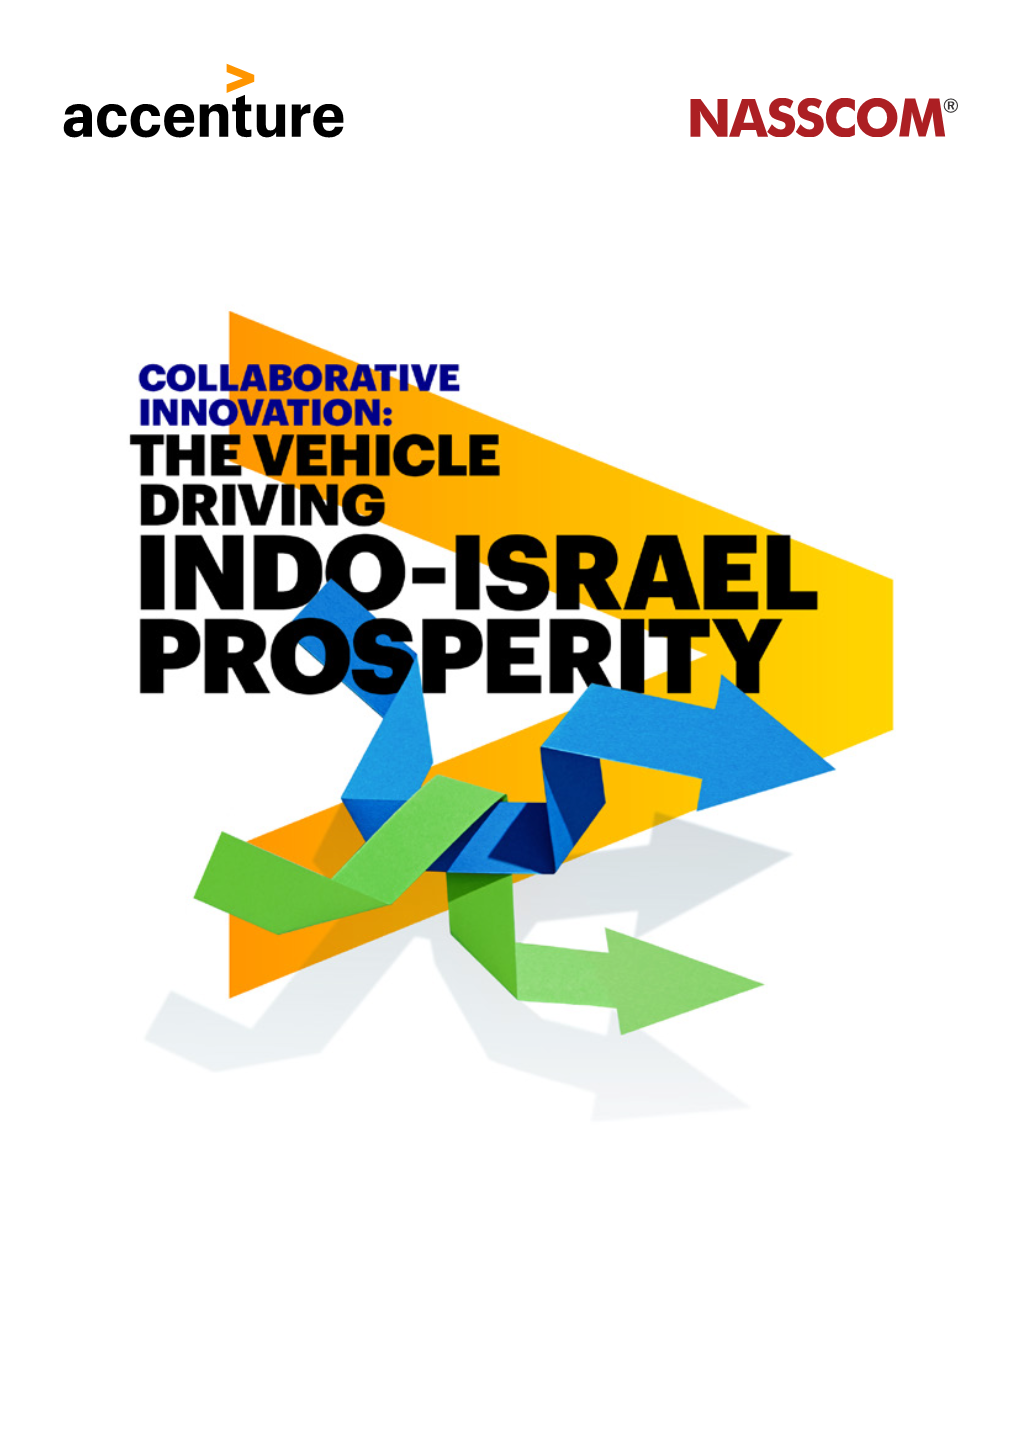 Collaborative Innovation: the Vehicle Driving Indo-Israel Prosperity Message from Accenture